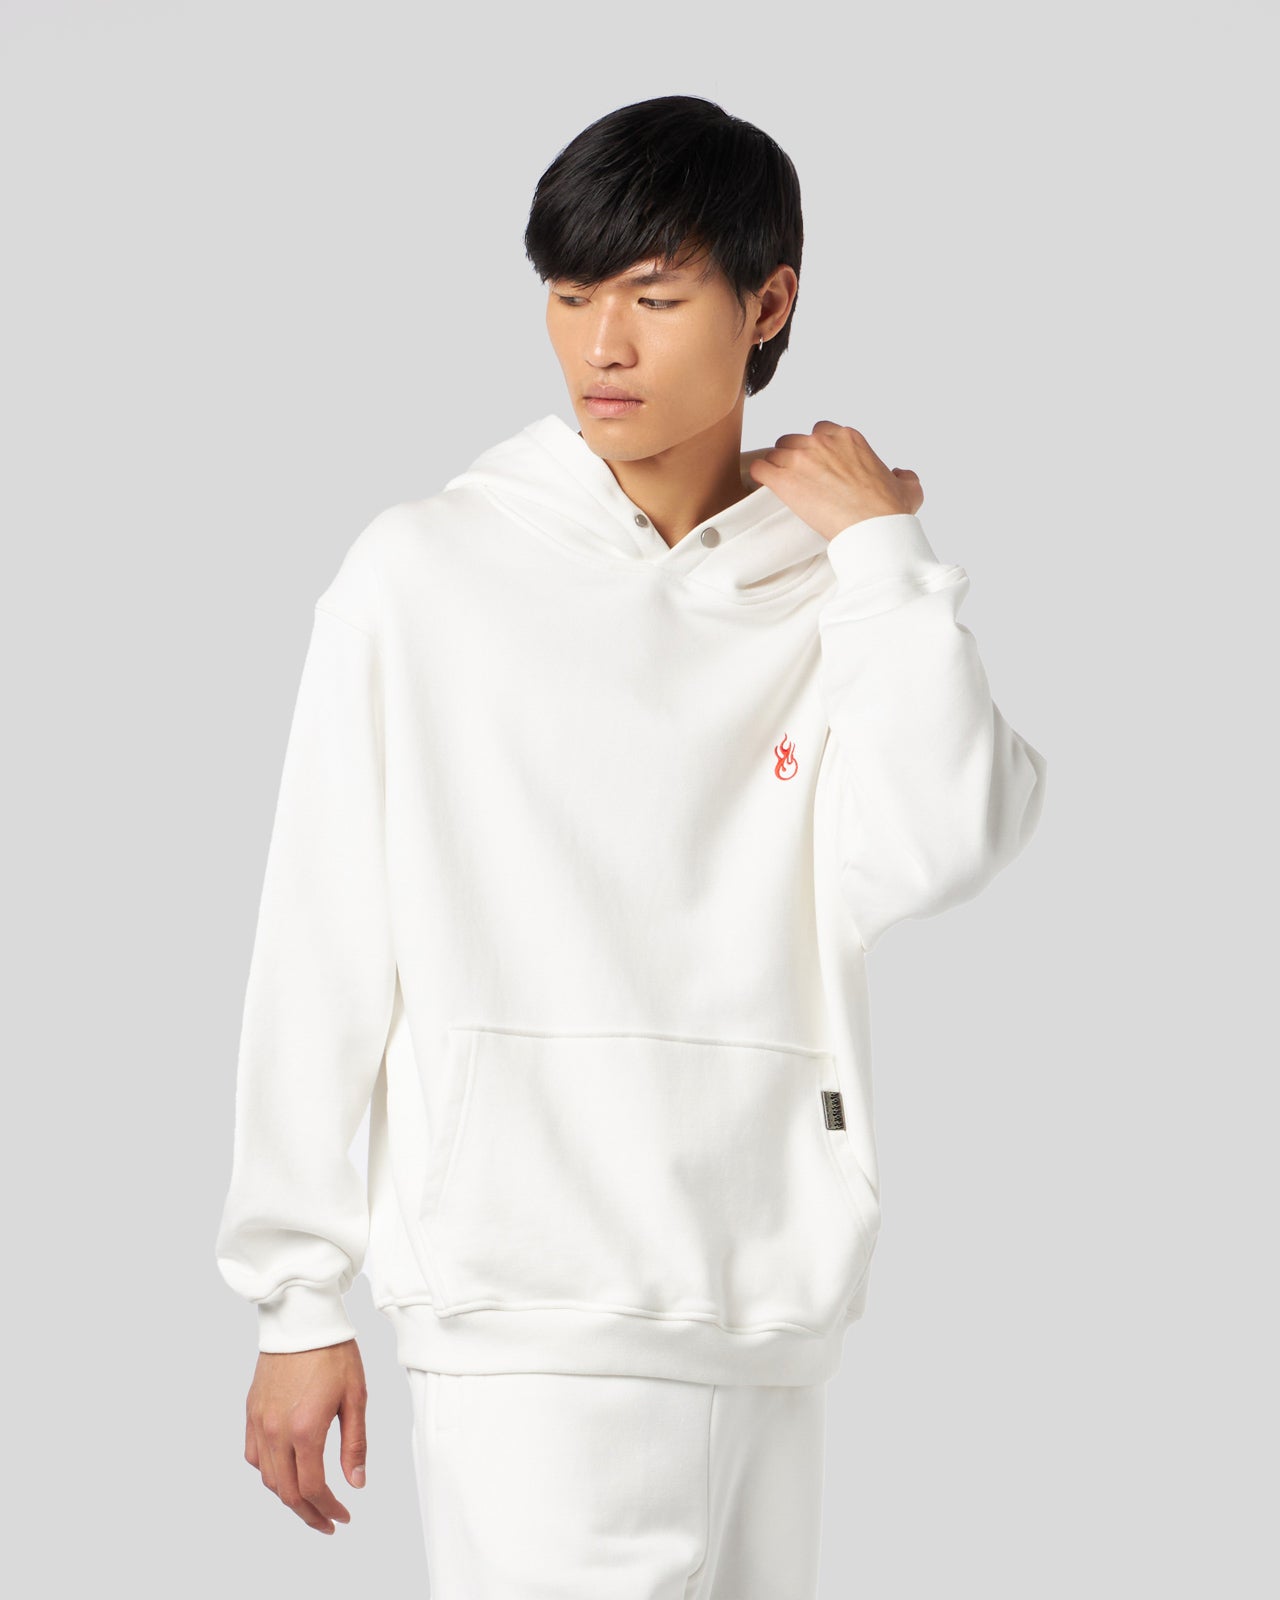 WHITE HOODIE WITH FLAMES LOGO